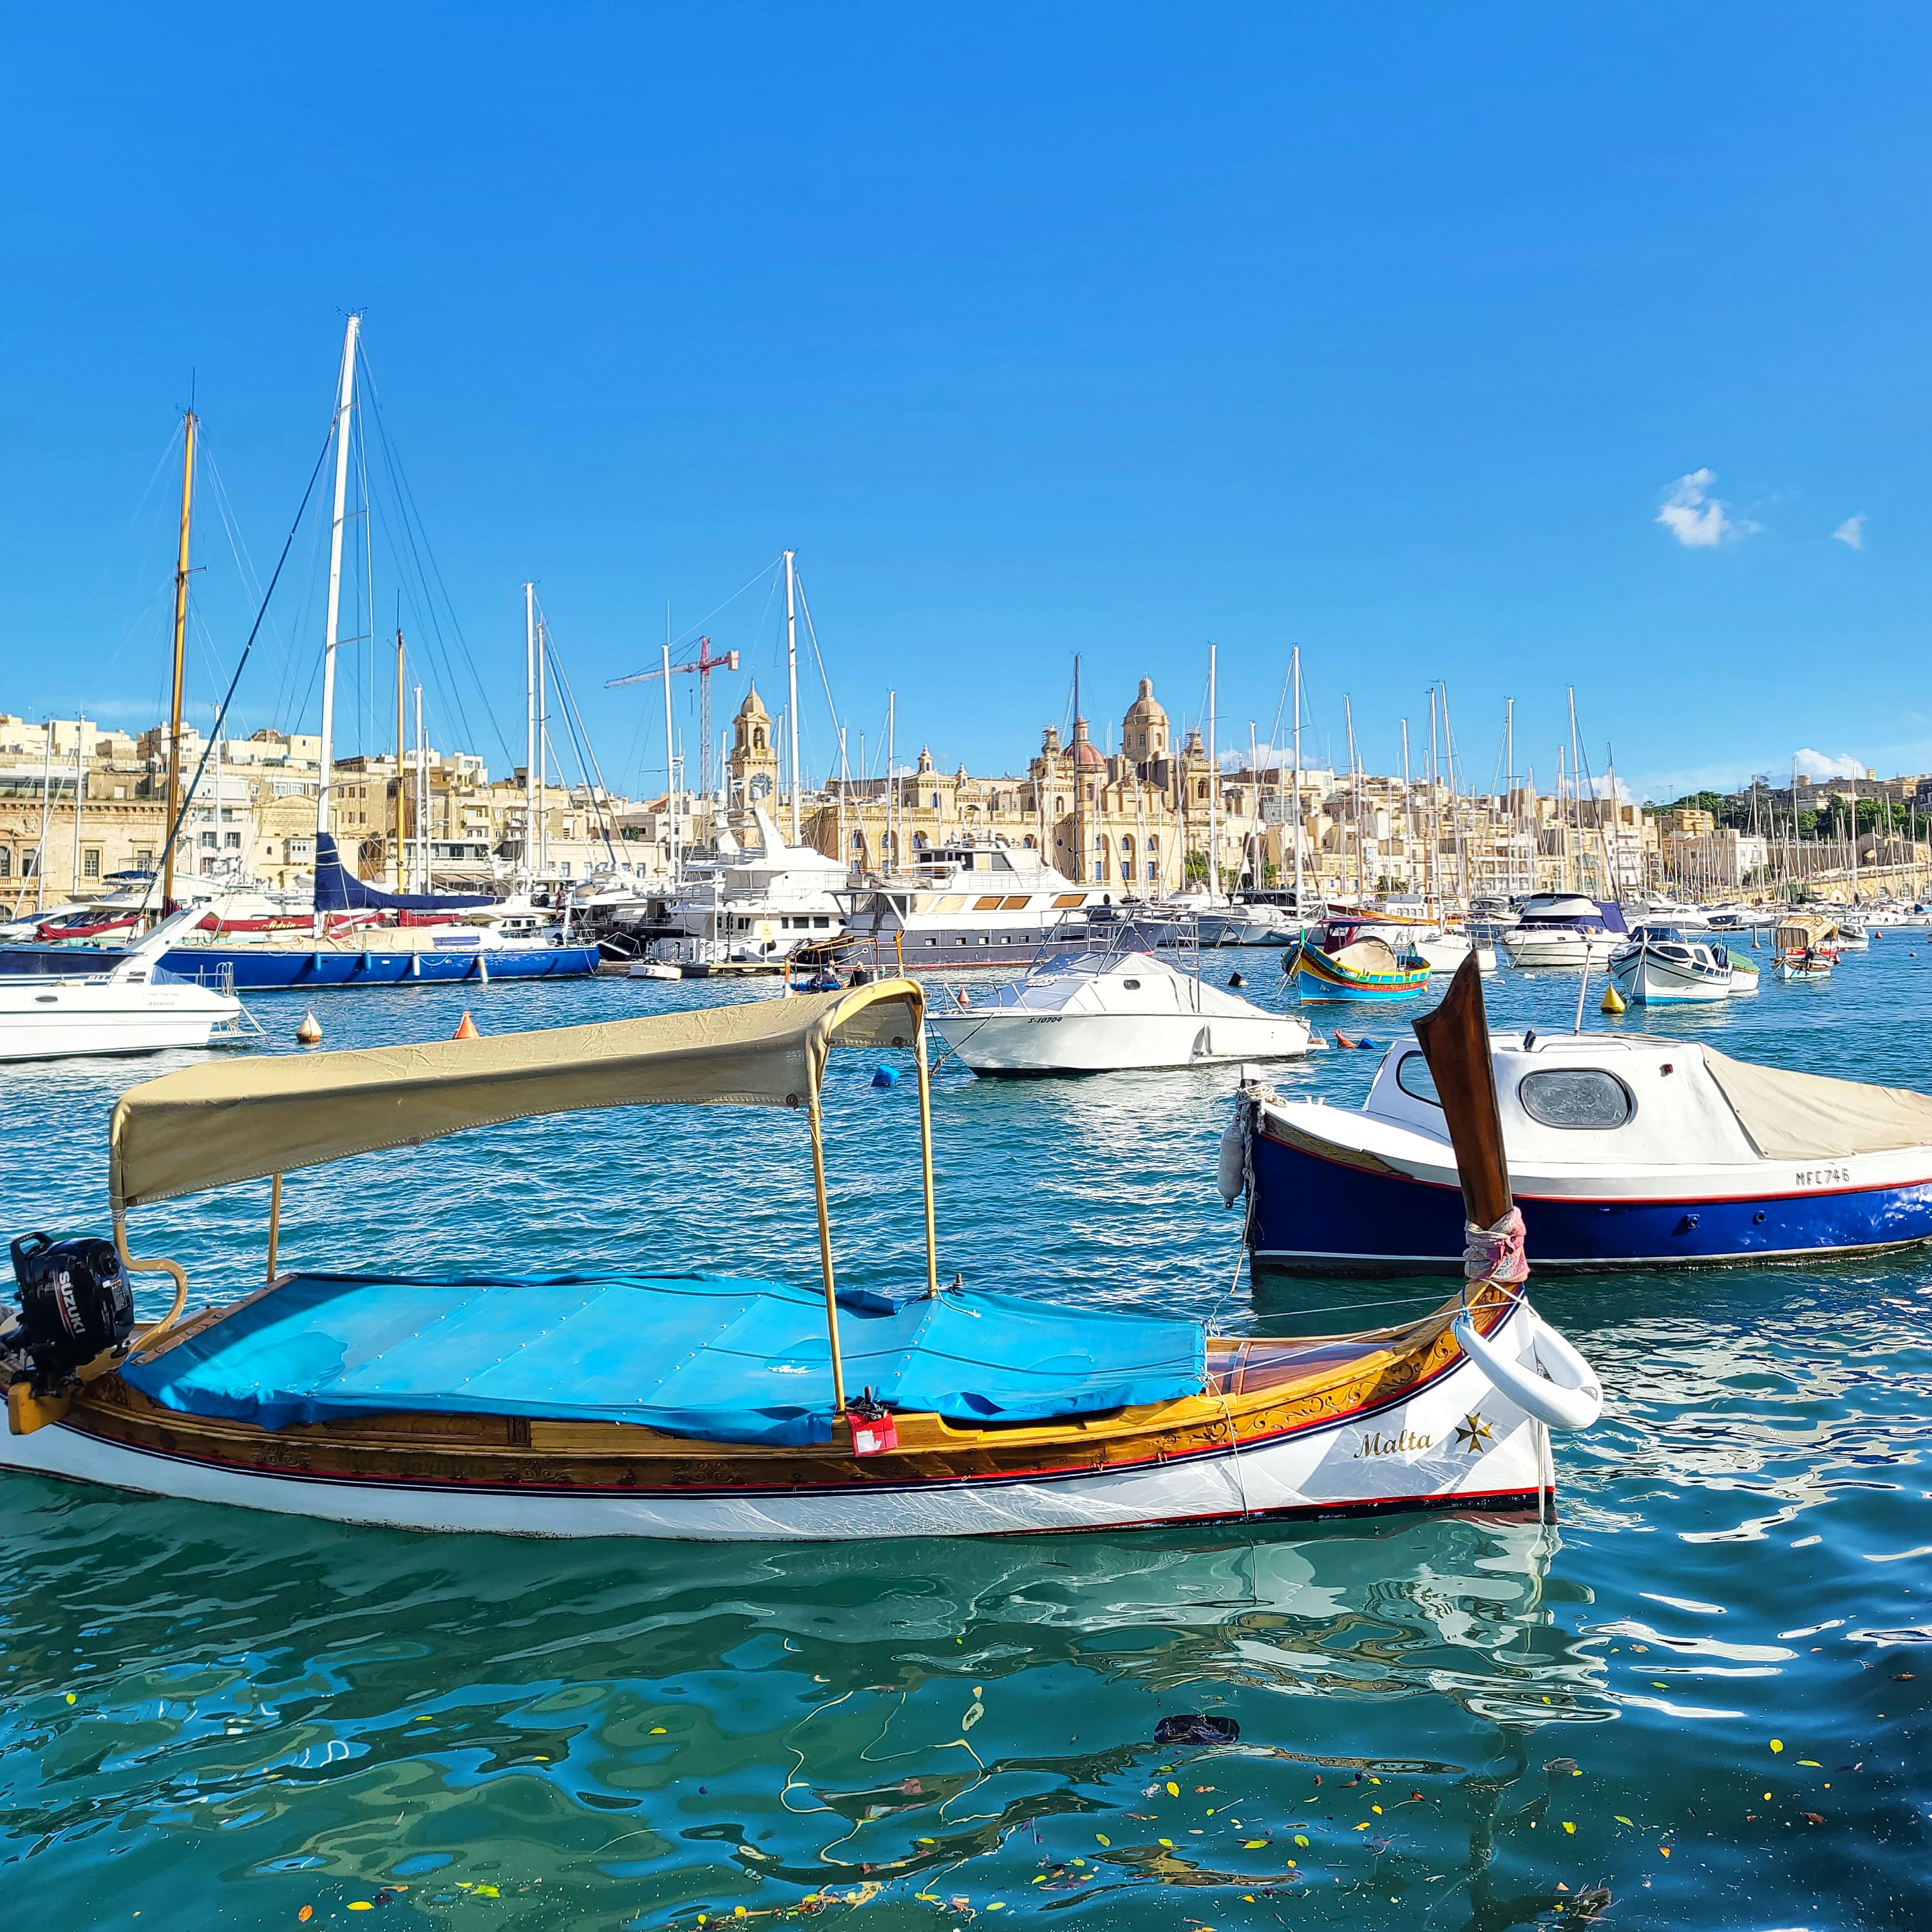 40 Things to See & Do in Malta